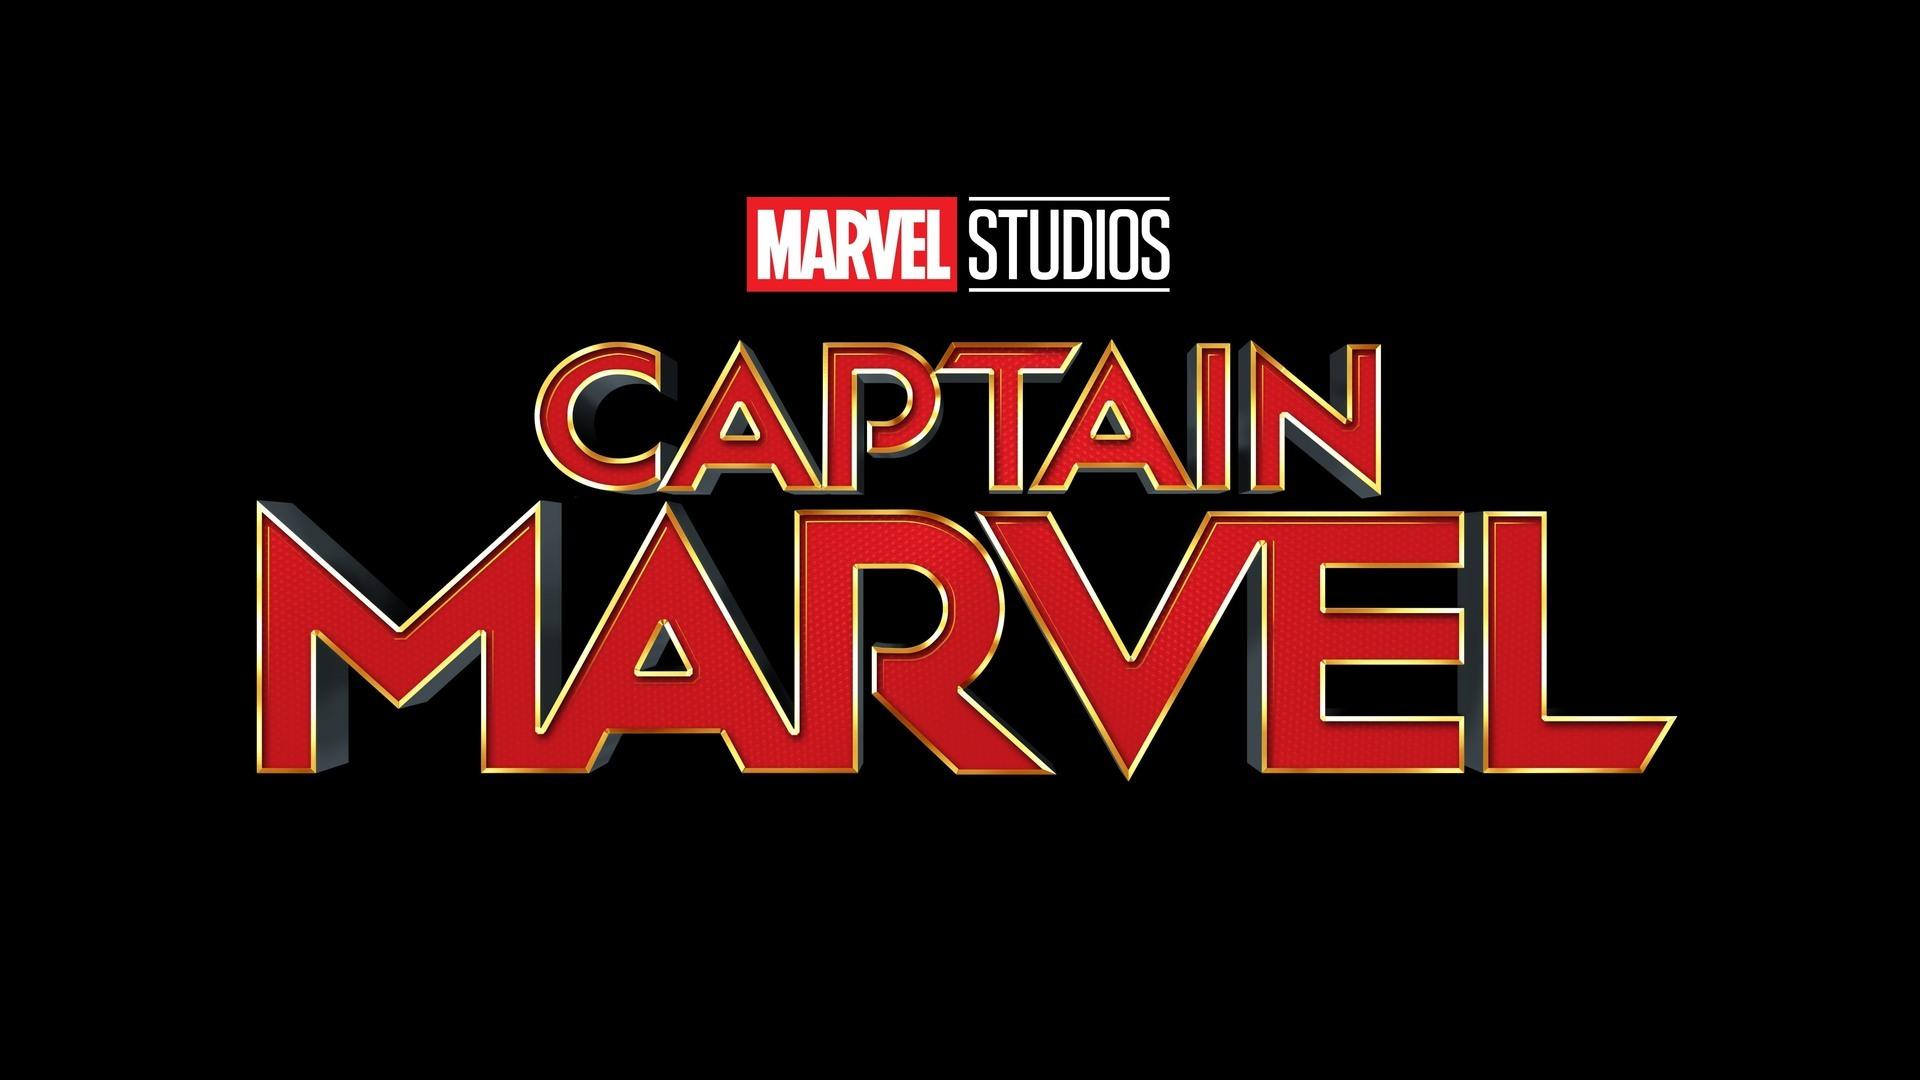 4K 2K Captain Marvel Wallpapers That You Must Get Today